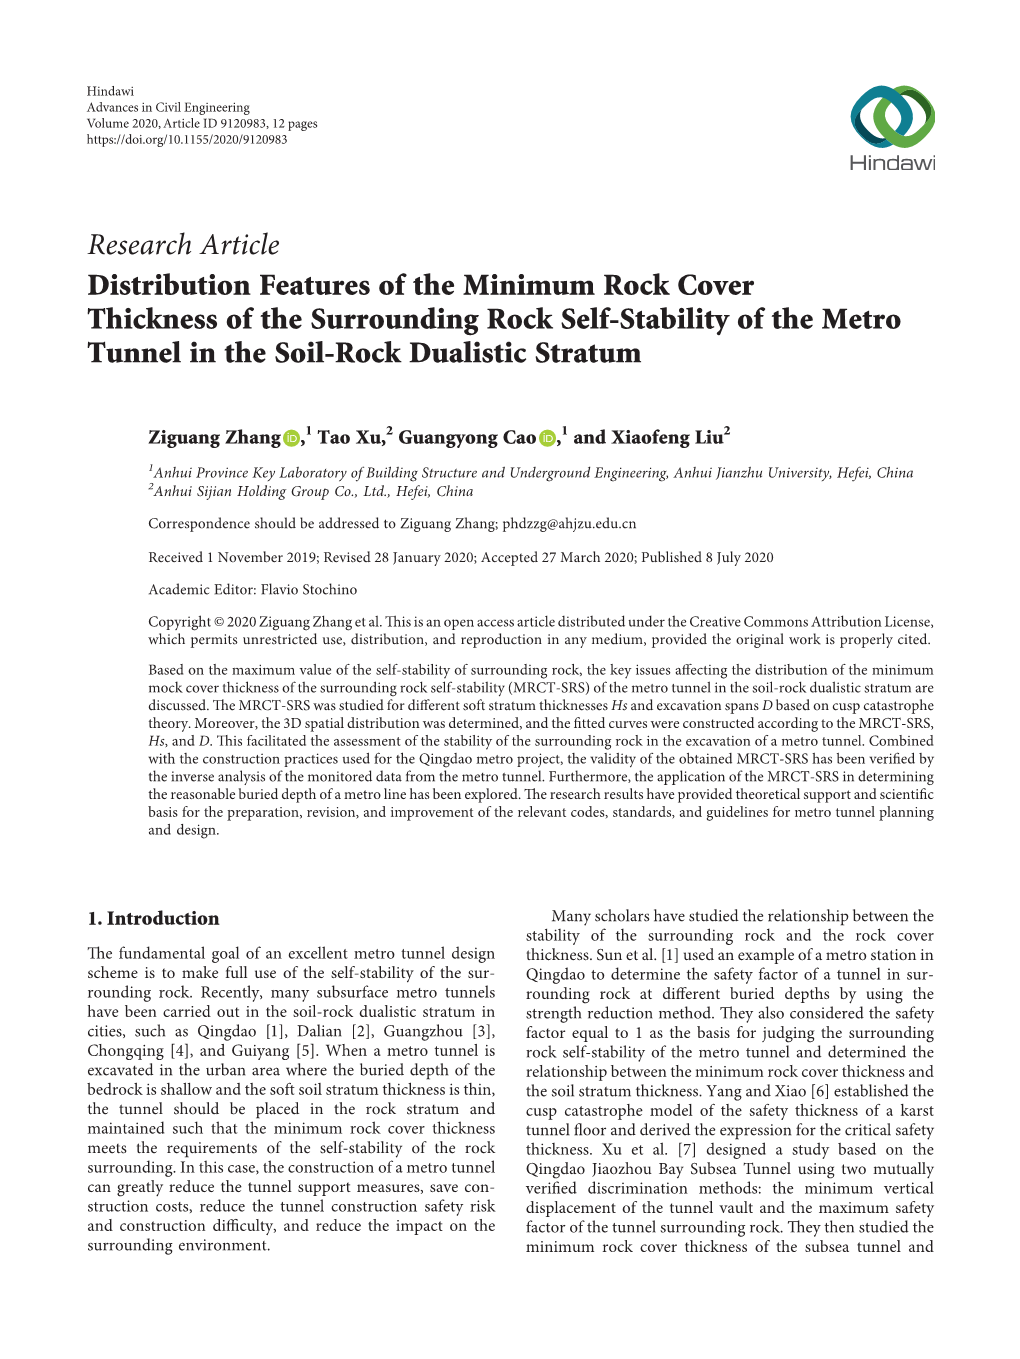 Distribution Features of the Minimum Rock Cover Thickness of the Surrounding Rock Self-Stability of the Metro Tunnel in the Soil-Rock Dualistic Stratum